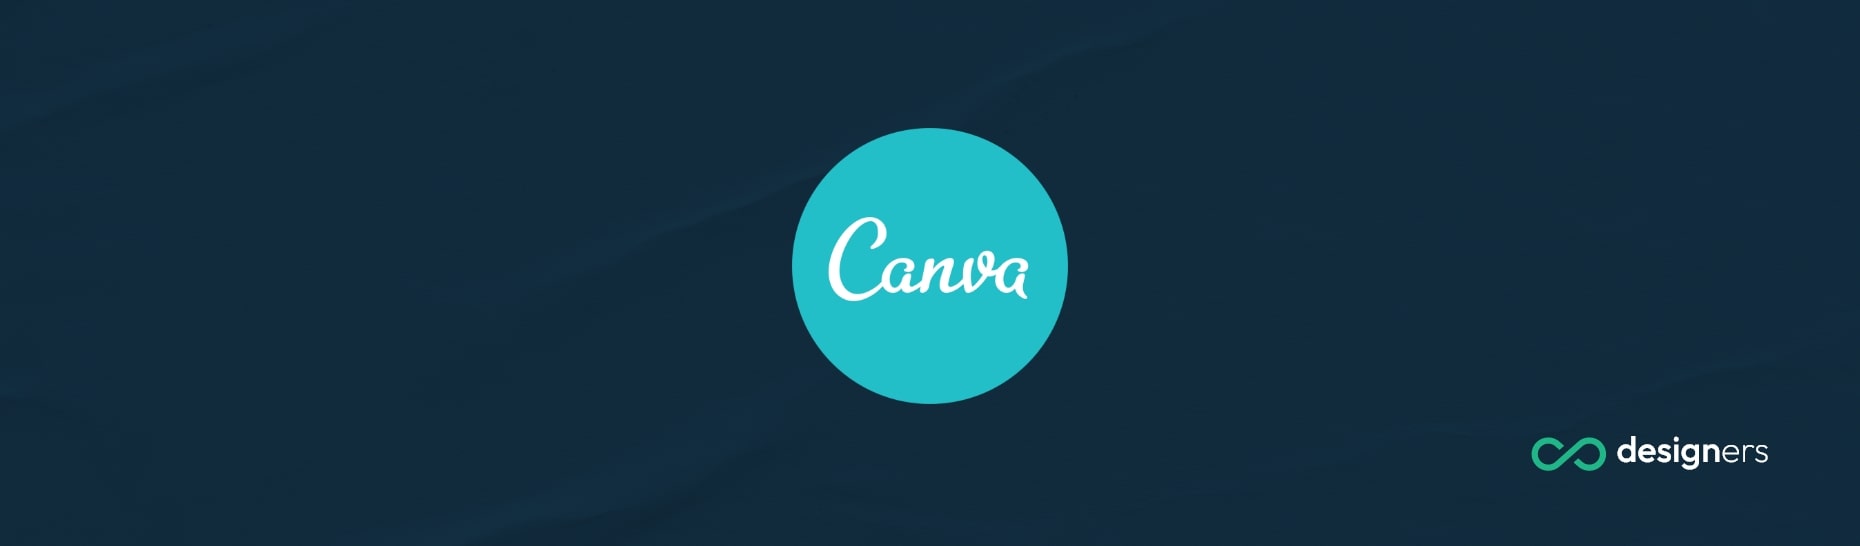 Is Canva Privately Owned?